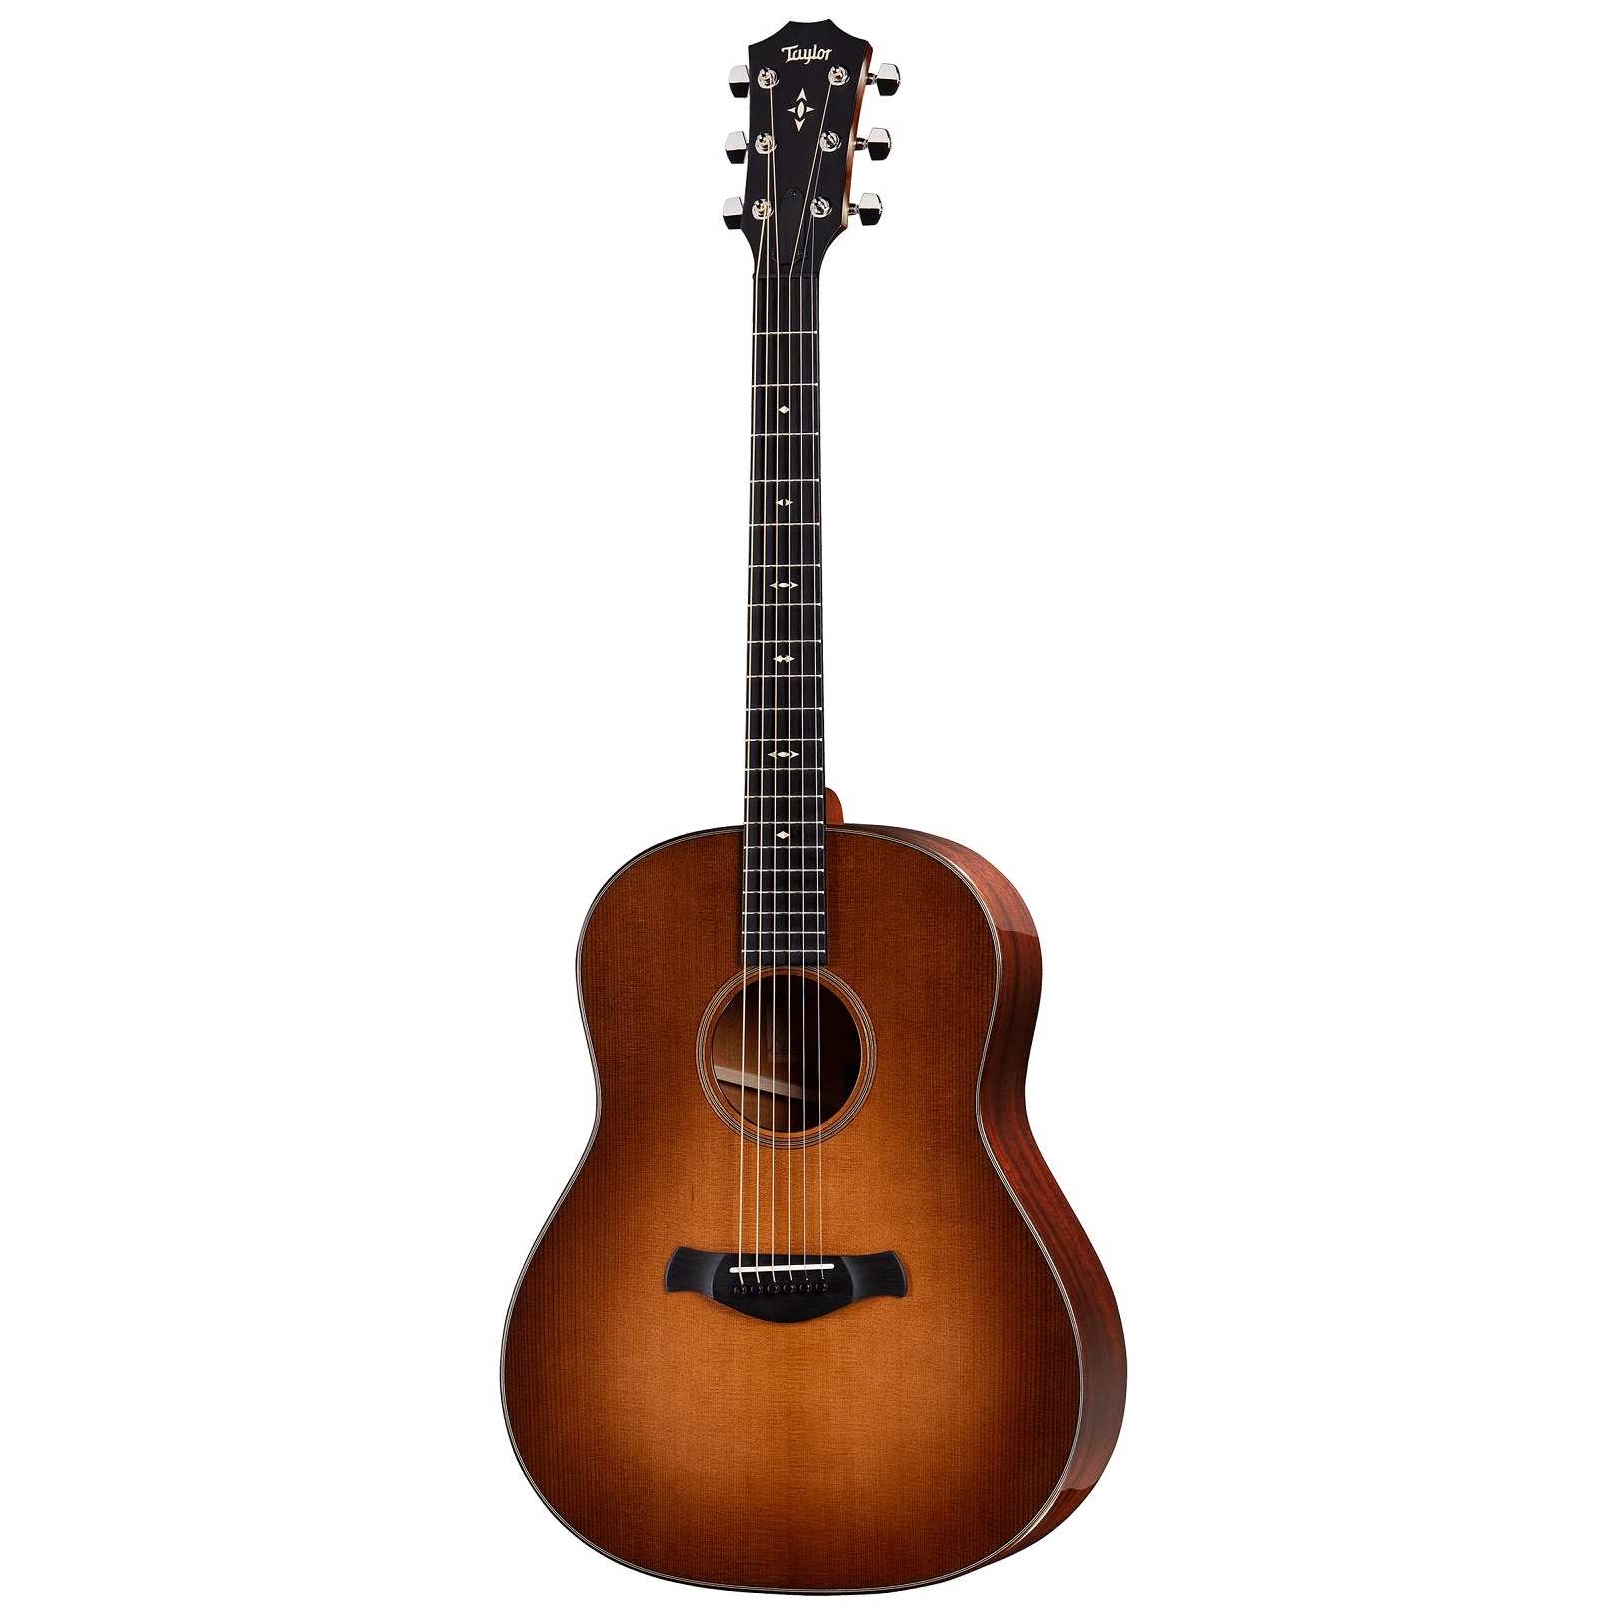 Taylor Builder’s Edition 517 WHB